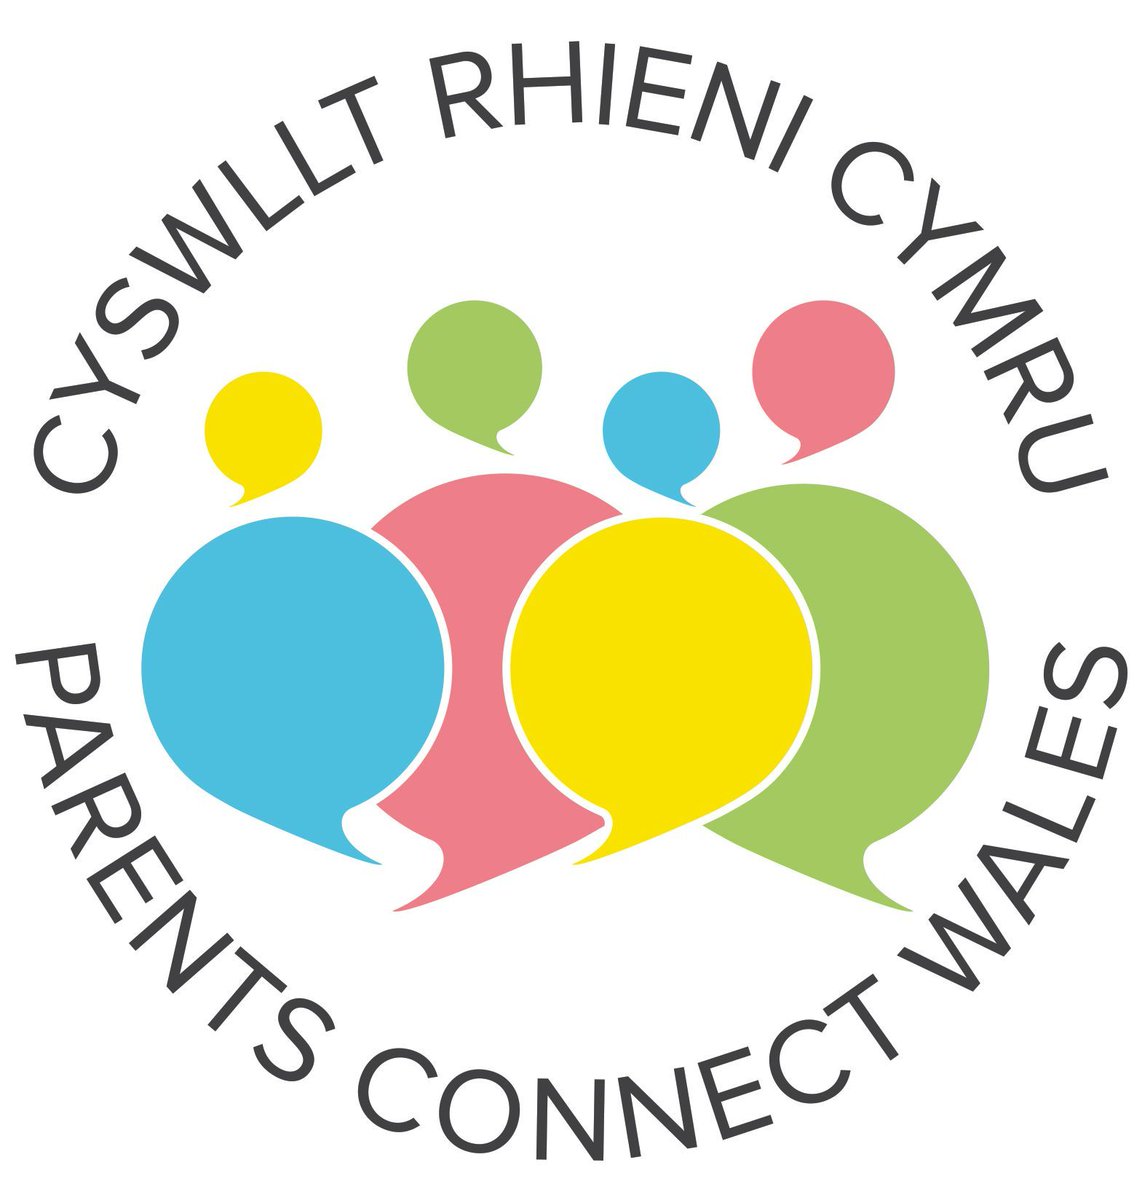 Parents Connect Wales is a project led by Children in Wales with funding secured from the Welsh Government. 📝 Our aim is to ‘Empower the voices of parents & carers to promote children’s rights’ 📢 Check out our new online hub below! 👇 buff.ly/3UVQqRP